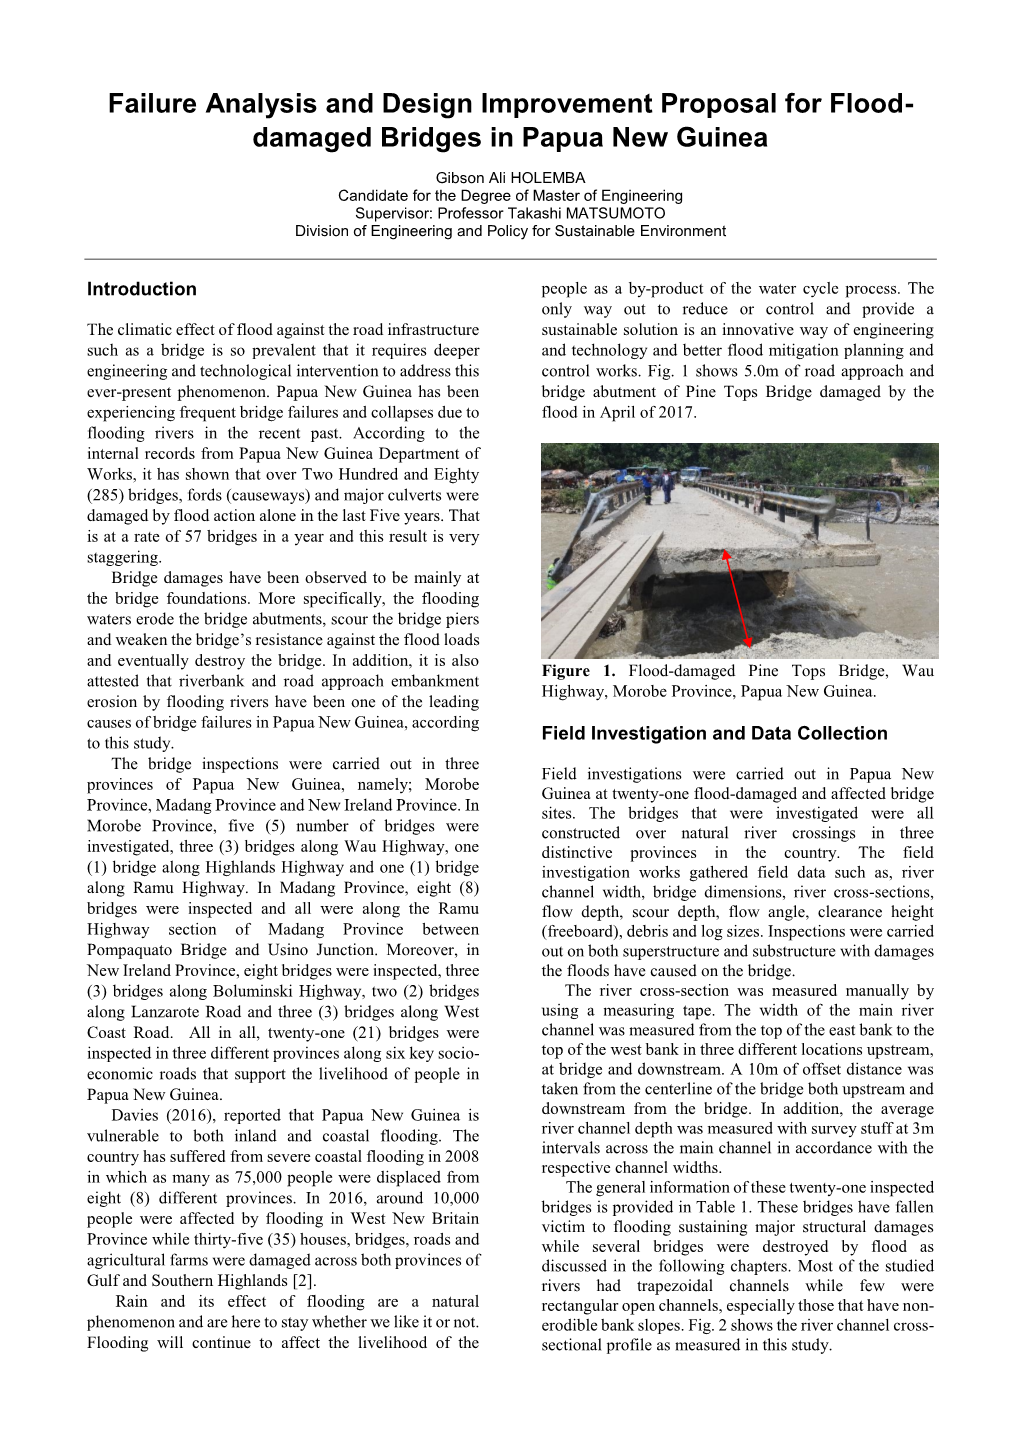 Failure Analysis and Design Improvement Proposal for Flood- Damaged Bridges in Papua New Guinea